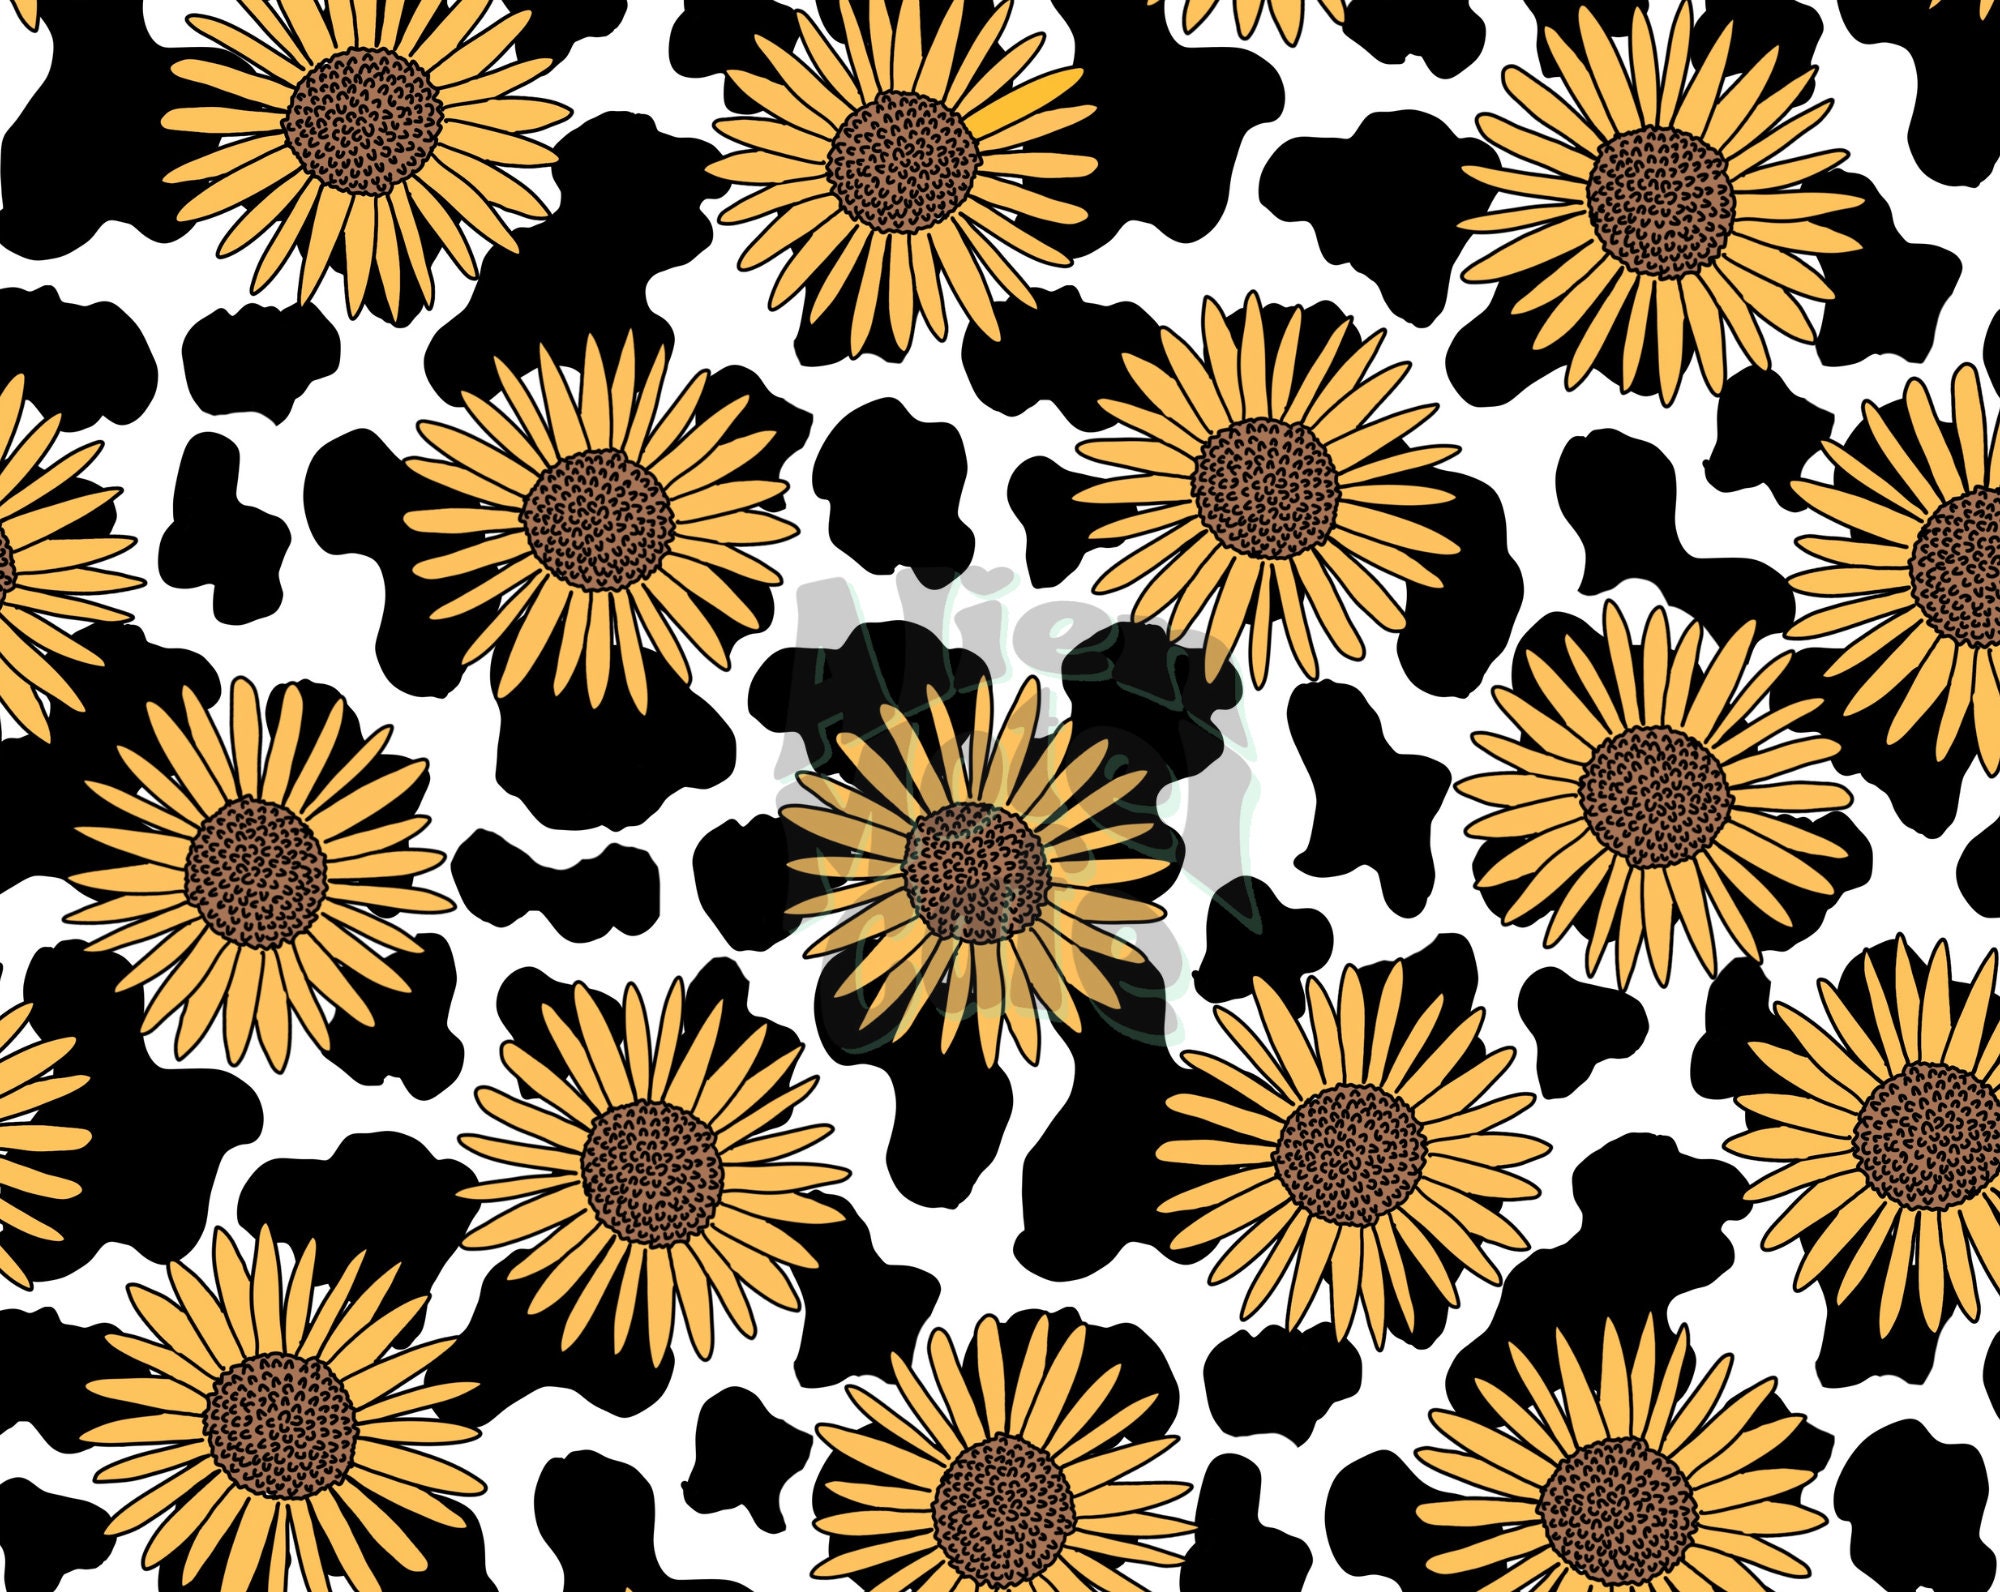 Brown cow print with sunflowers seamless Vector Image